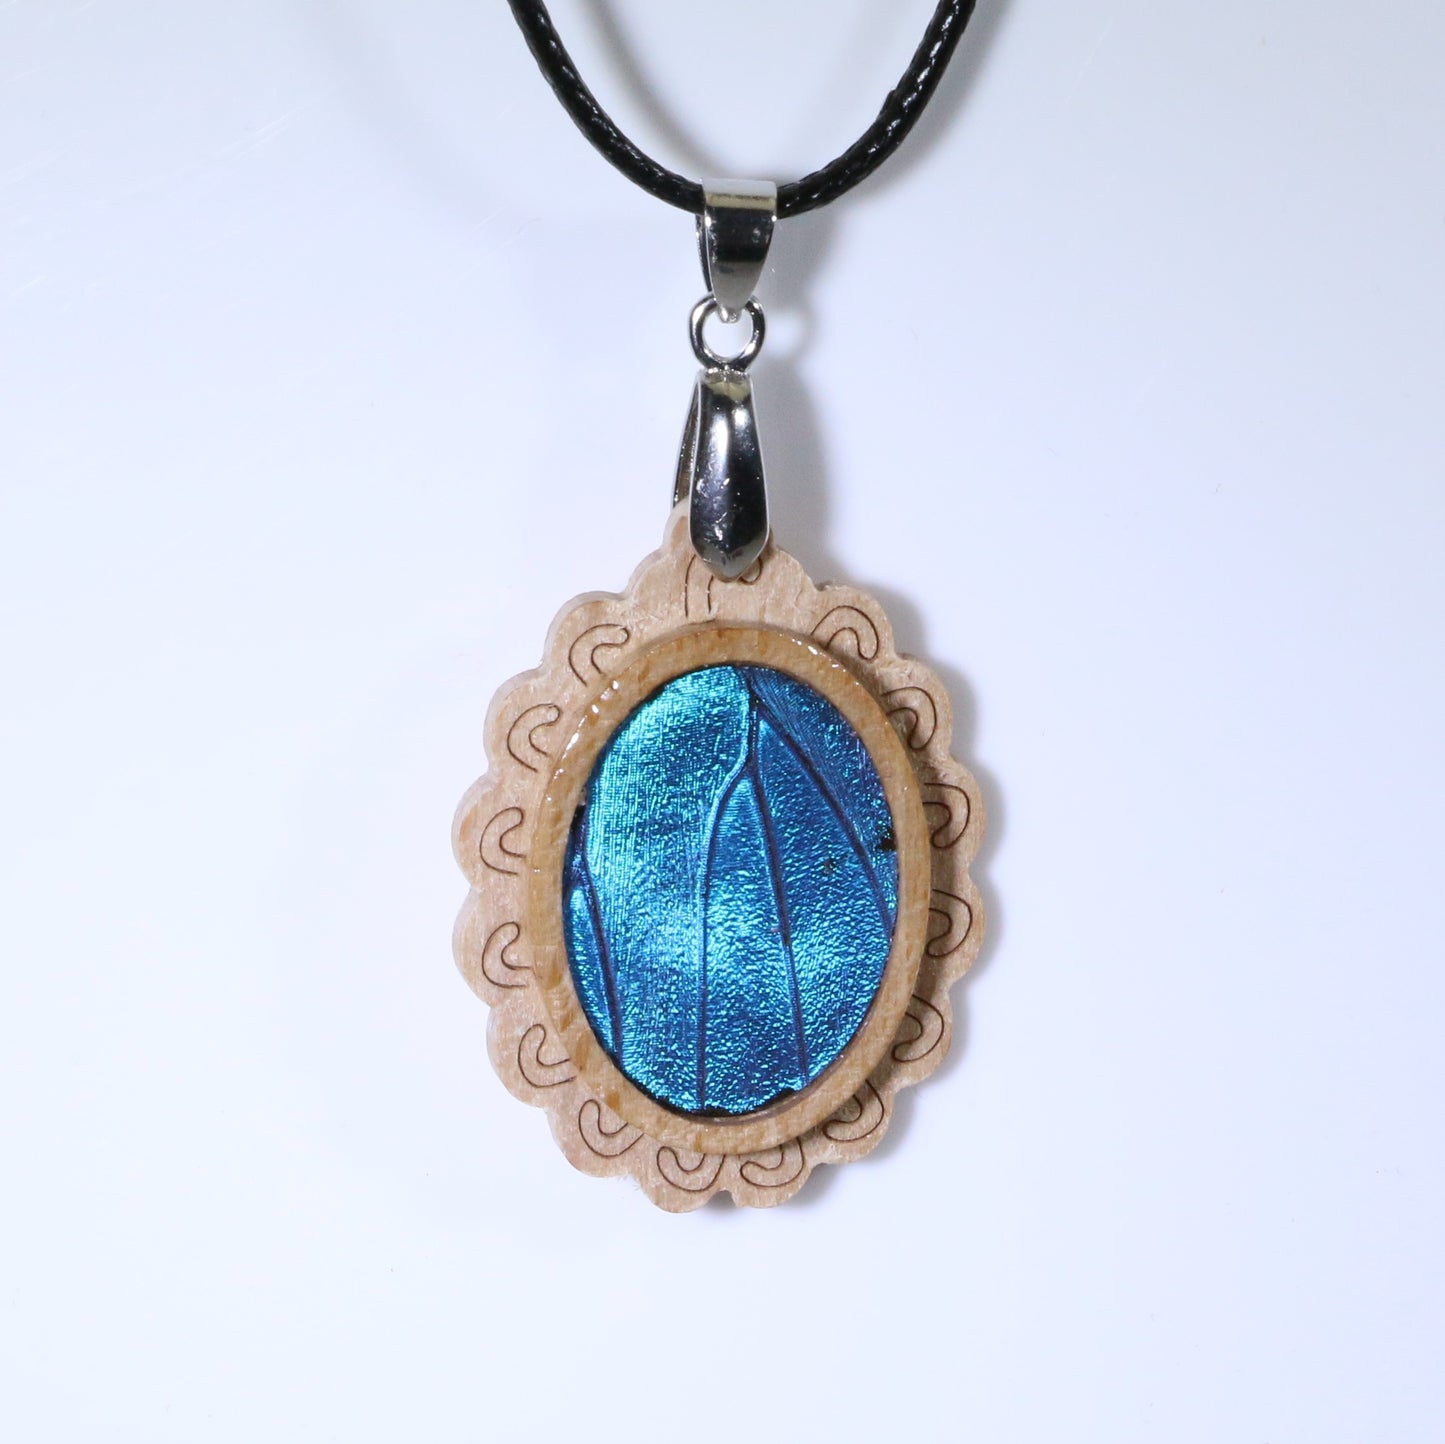 52701 - Real Butterfly Wing Jewelry - Pendant - Tan Wood - Oval - Blue Morpho